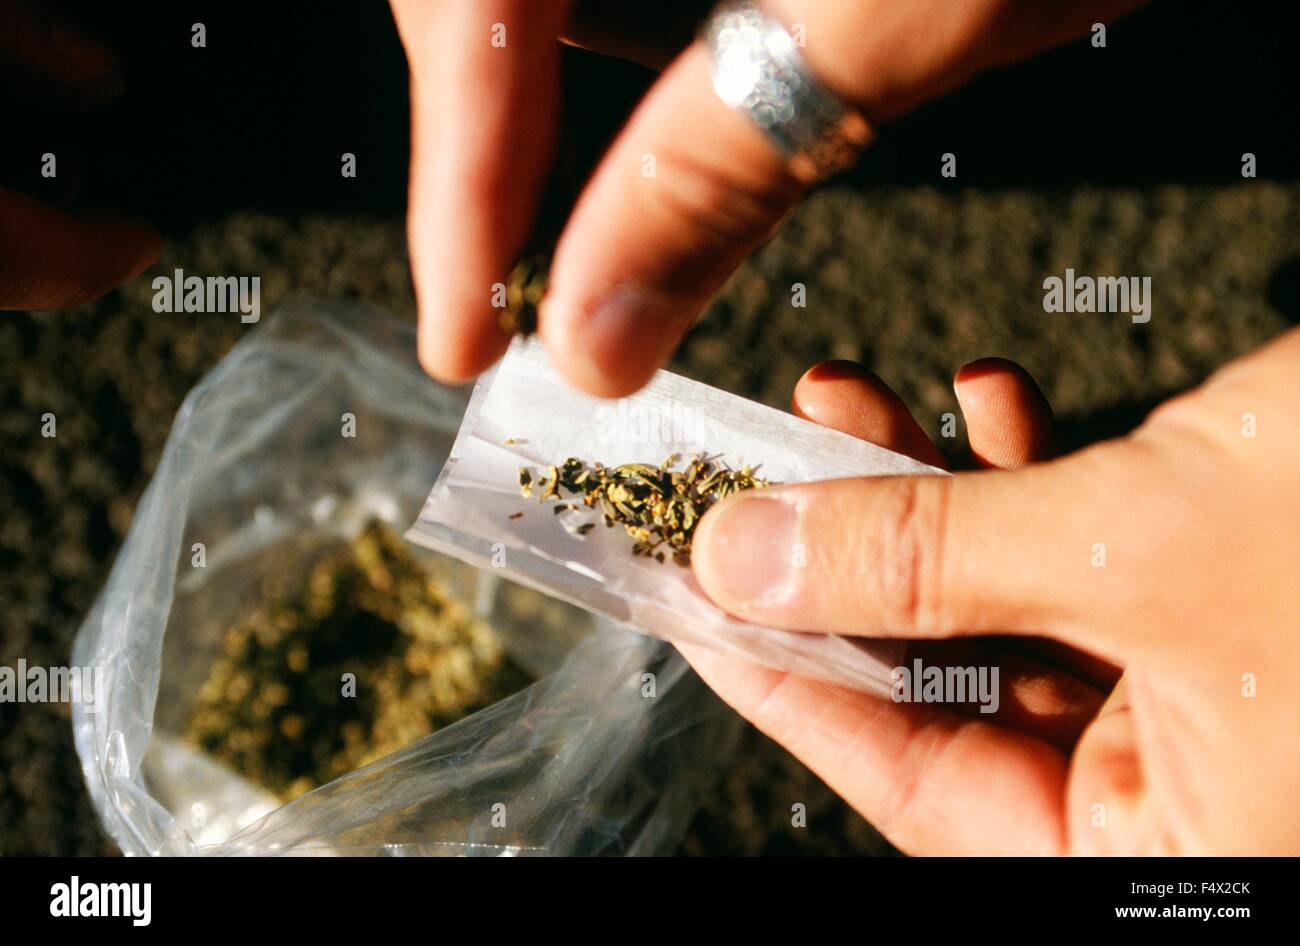 An addict rolls a joint using a synthetic cannabinoid called Spice use to spray on marijuana in order to enhance its psychoactive affect October 22, 2015 in Arlington, Virginia. Stock Photo